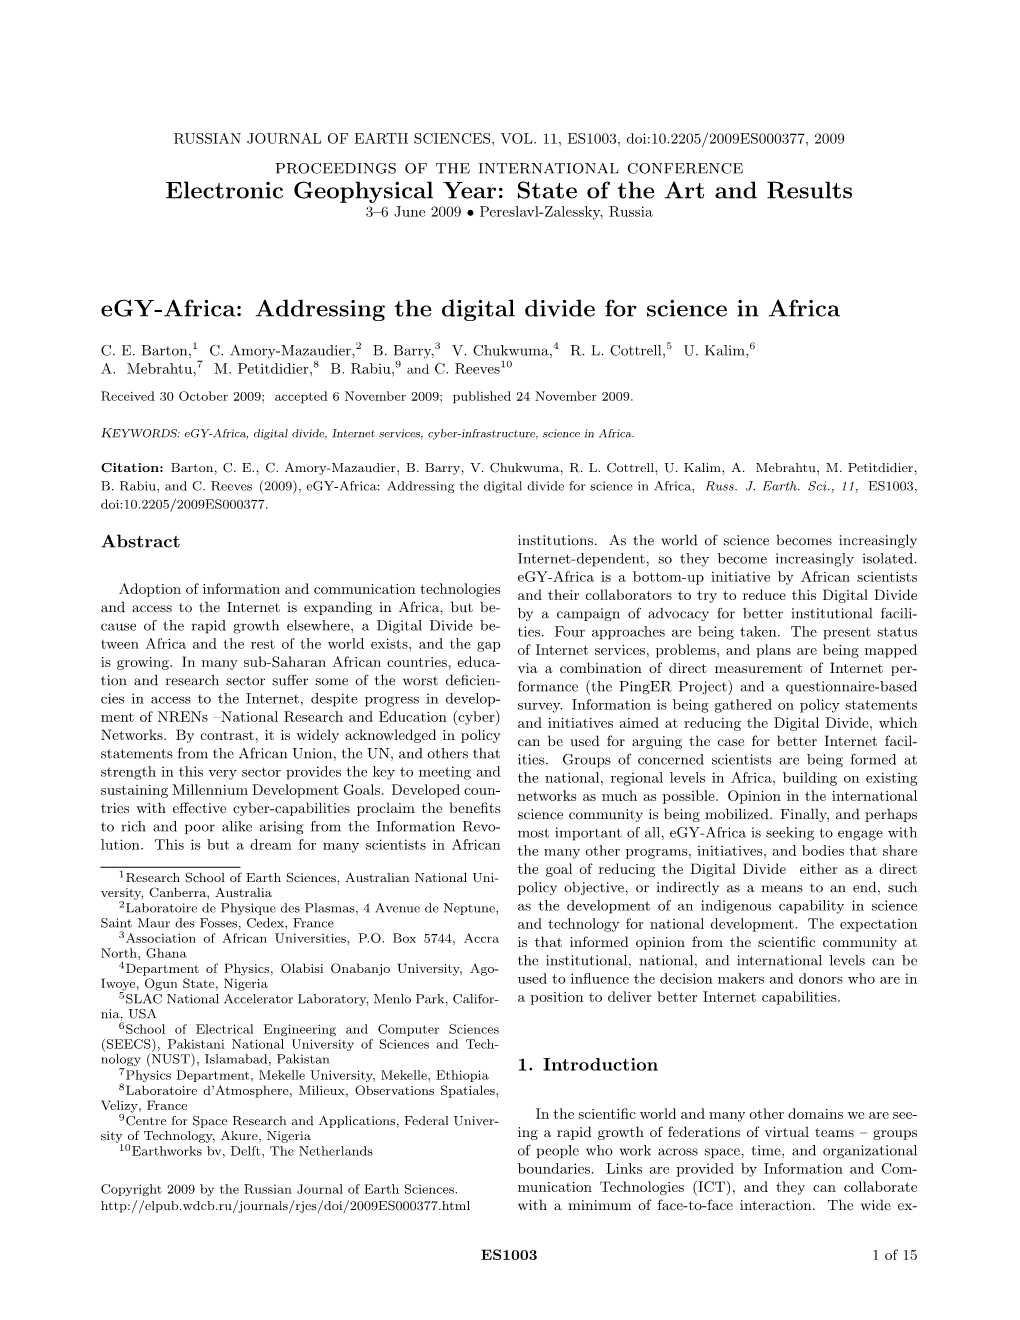 Electronic Geophysical Year: State of the Art and Results Egy-Africa: Addressing the Digital Divide for Science in Africa